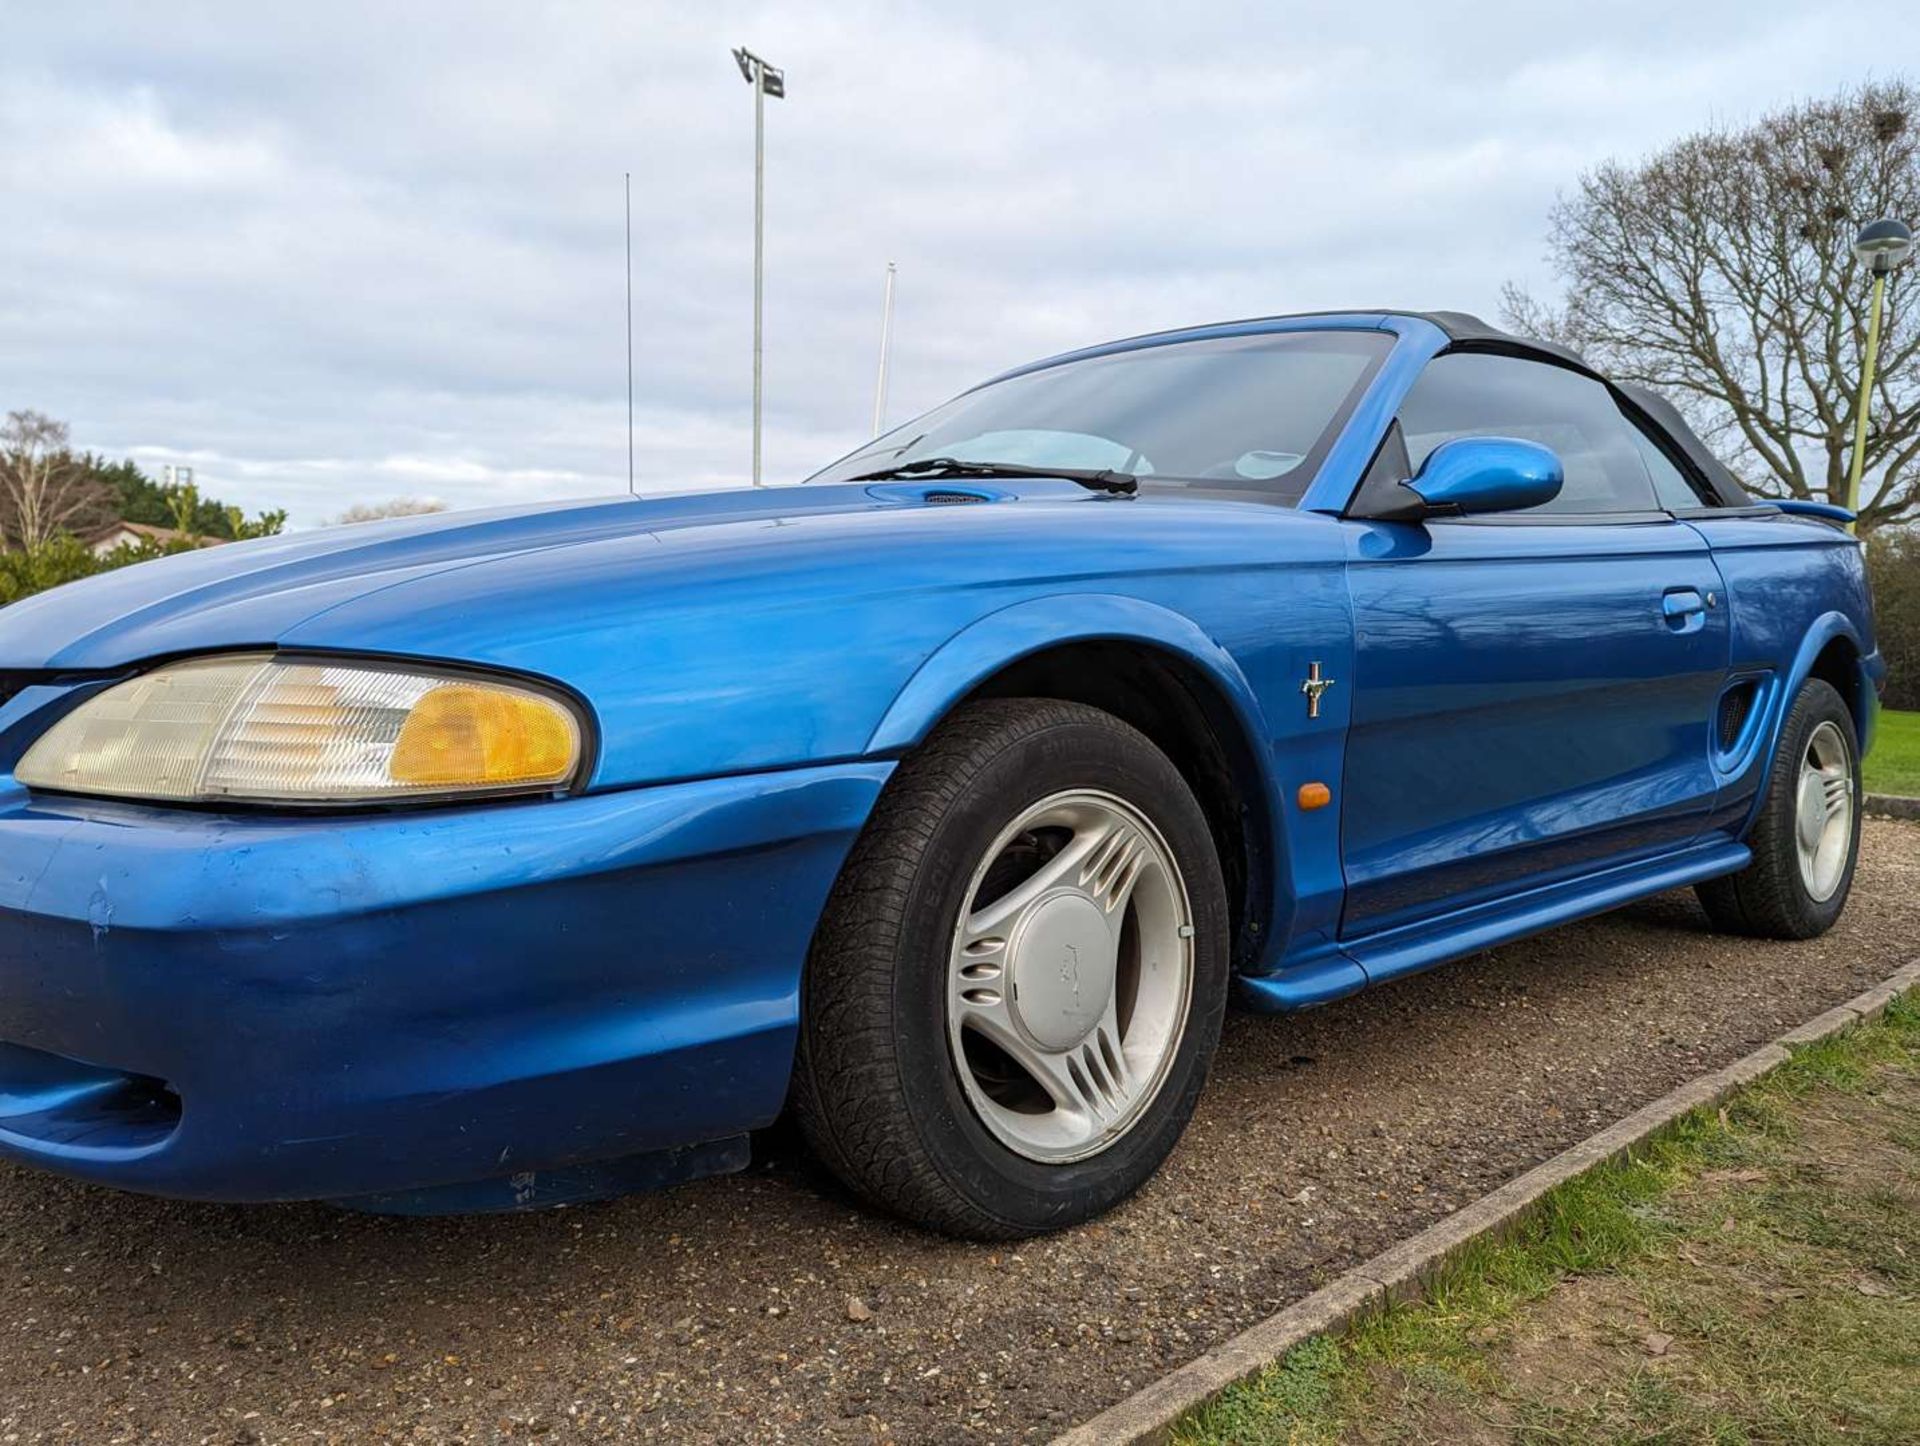 1994 FORD MUSTANG 3.8 CONVERTIBLE LHD - Image 10 of 29